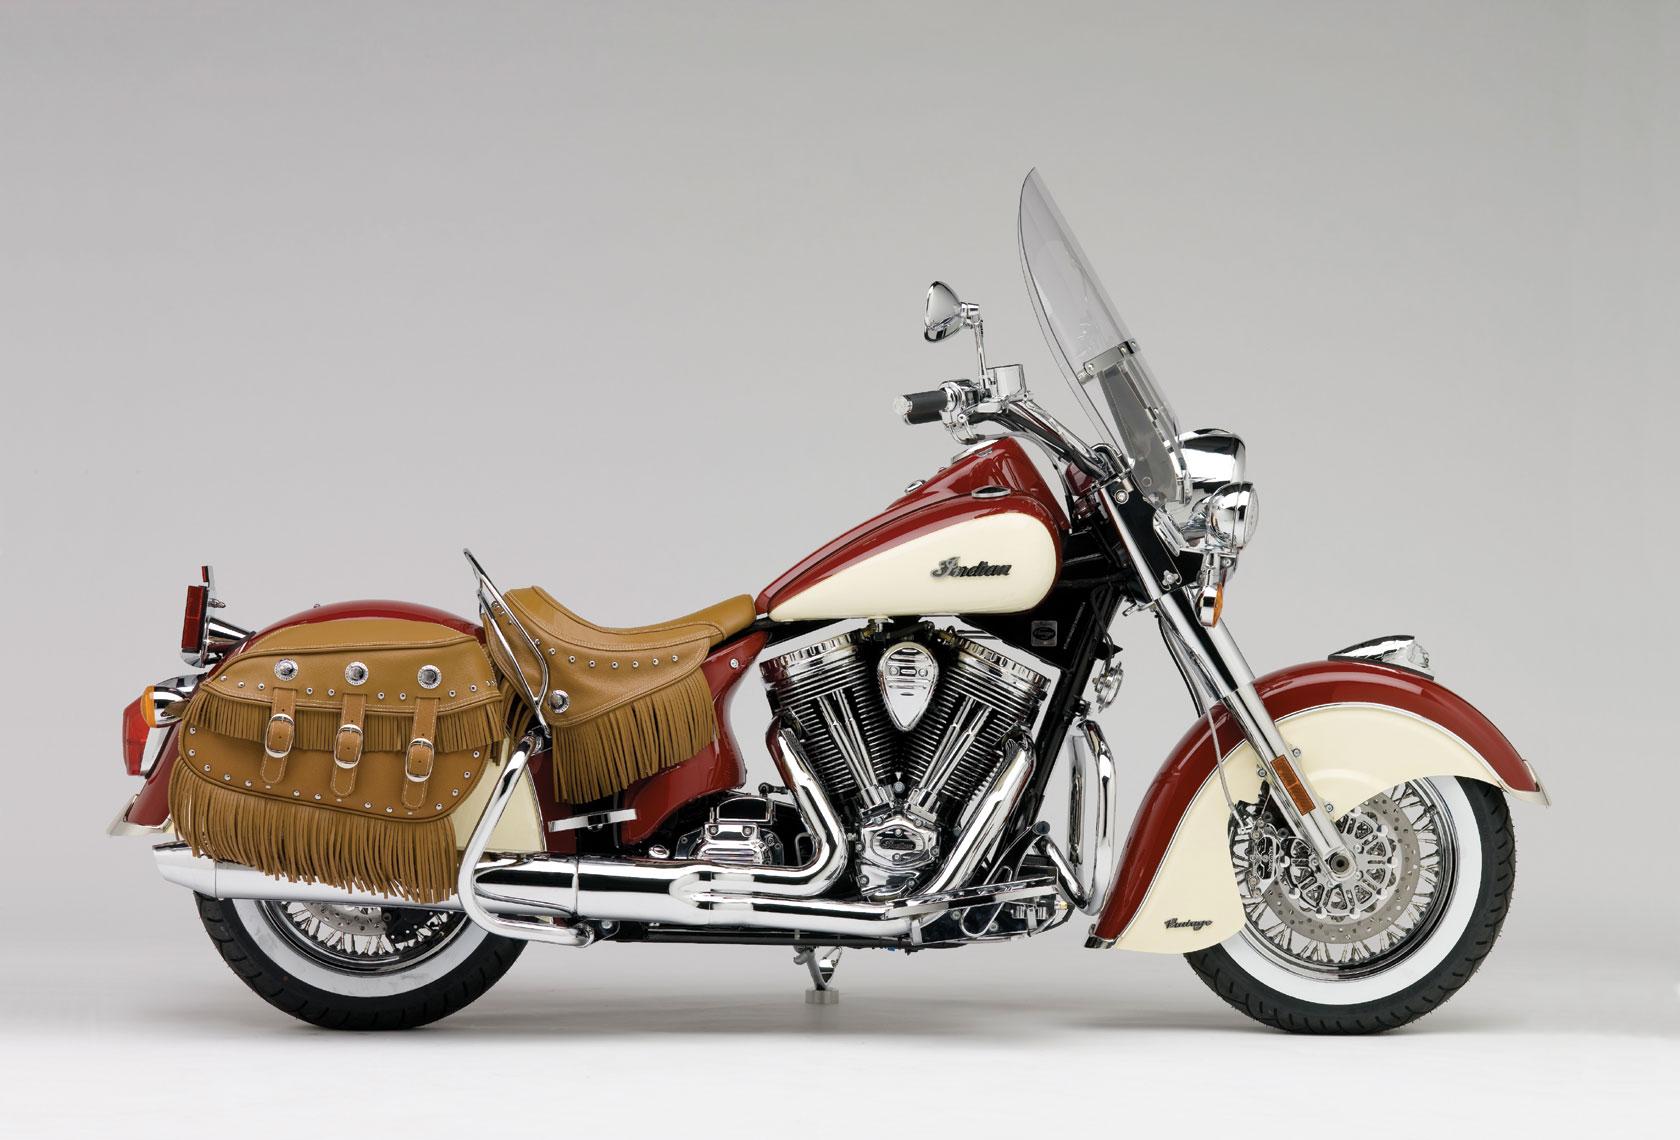 1680x1140px Indian Motorcycle 225.89 KB